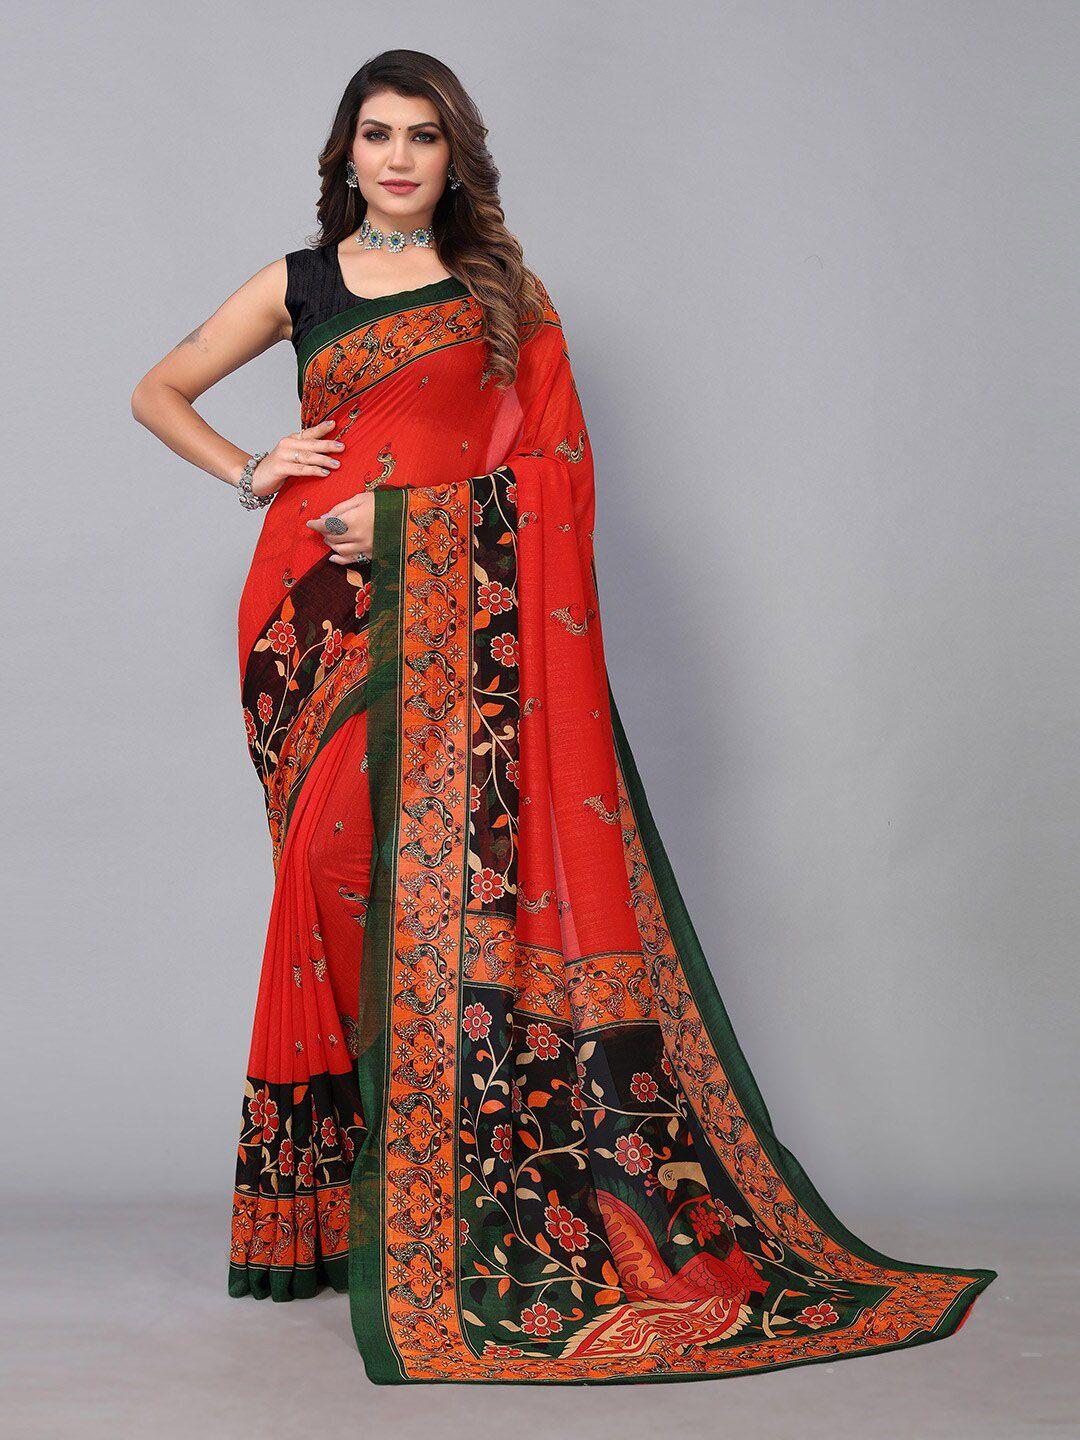 hritika red & green floral pure georgette saree